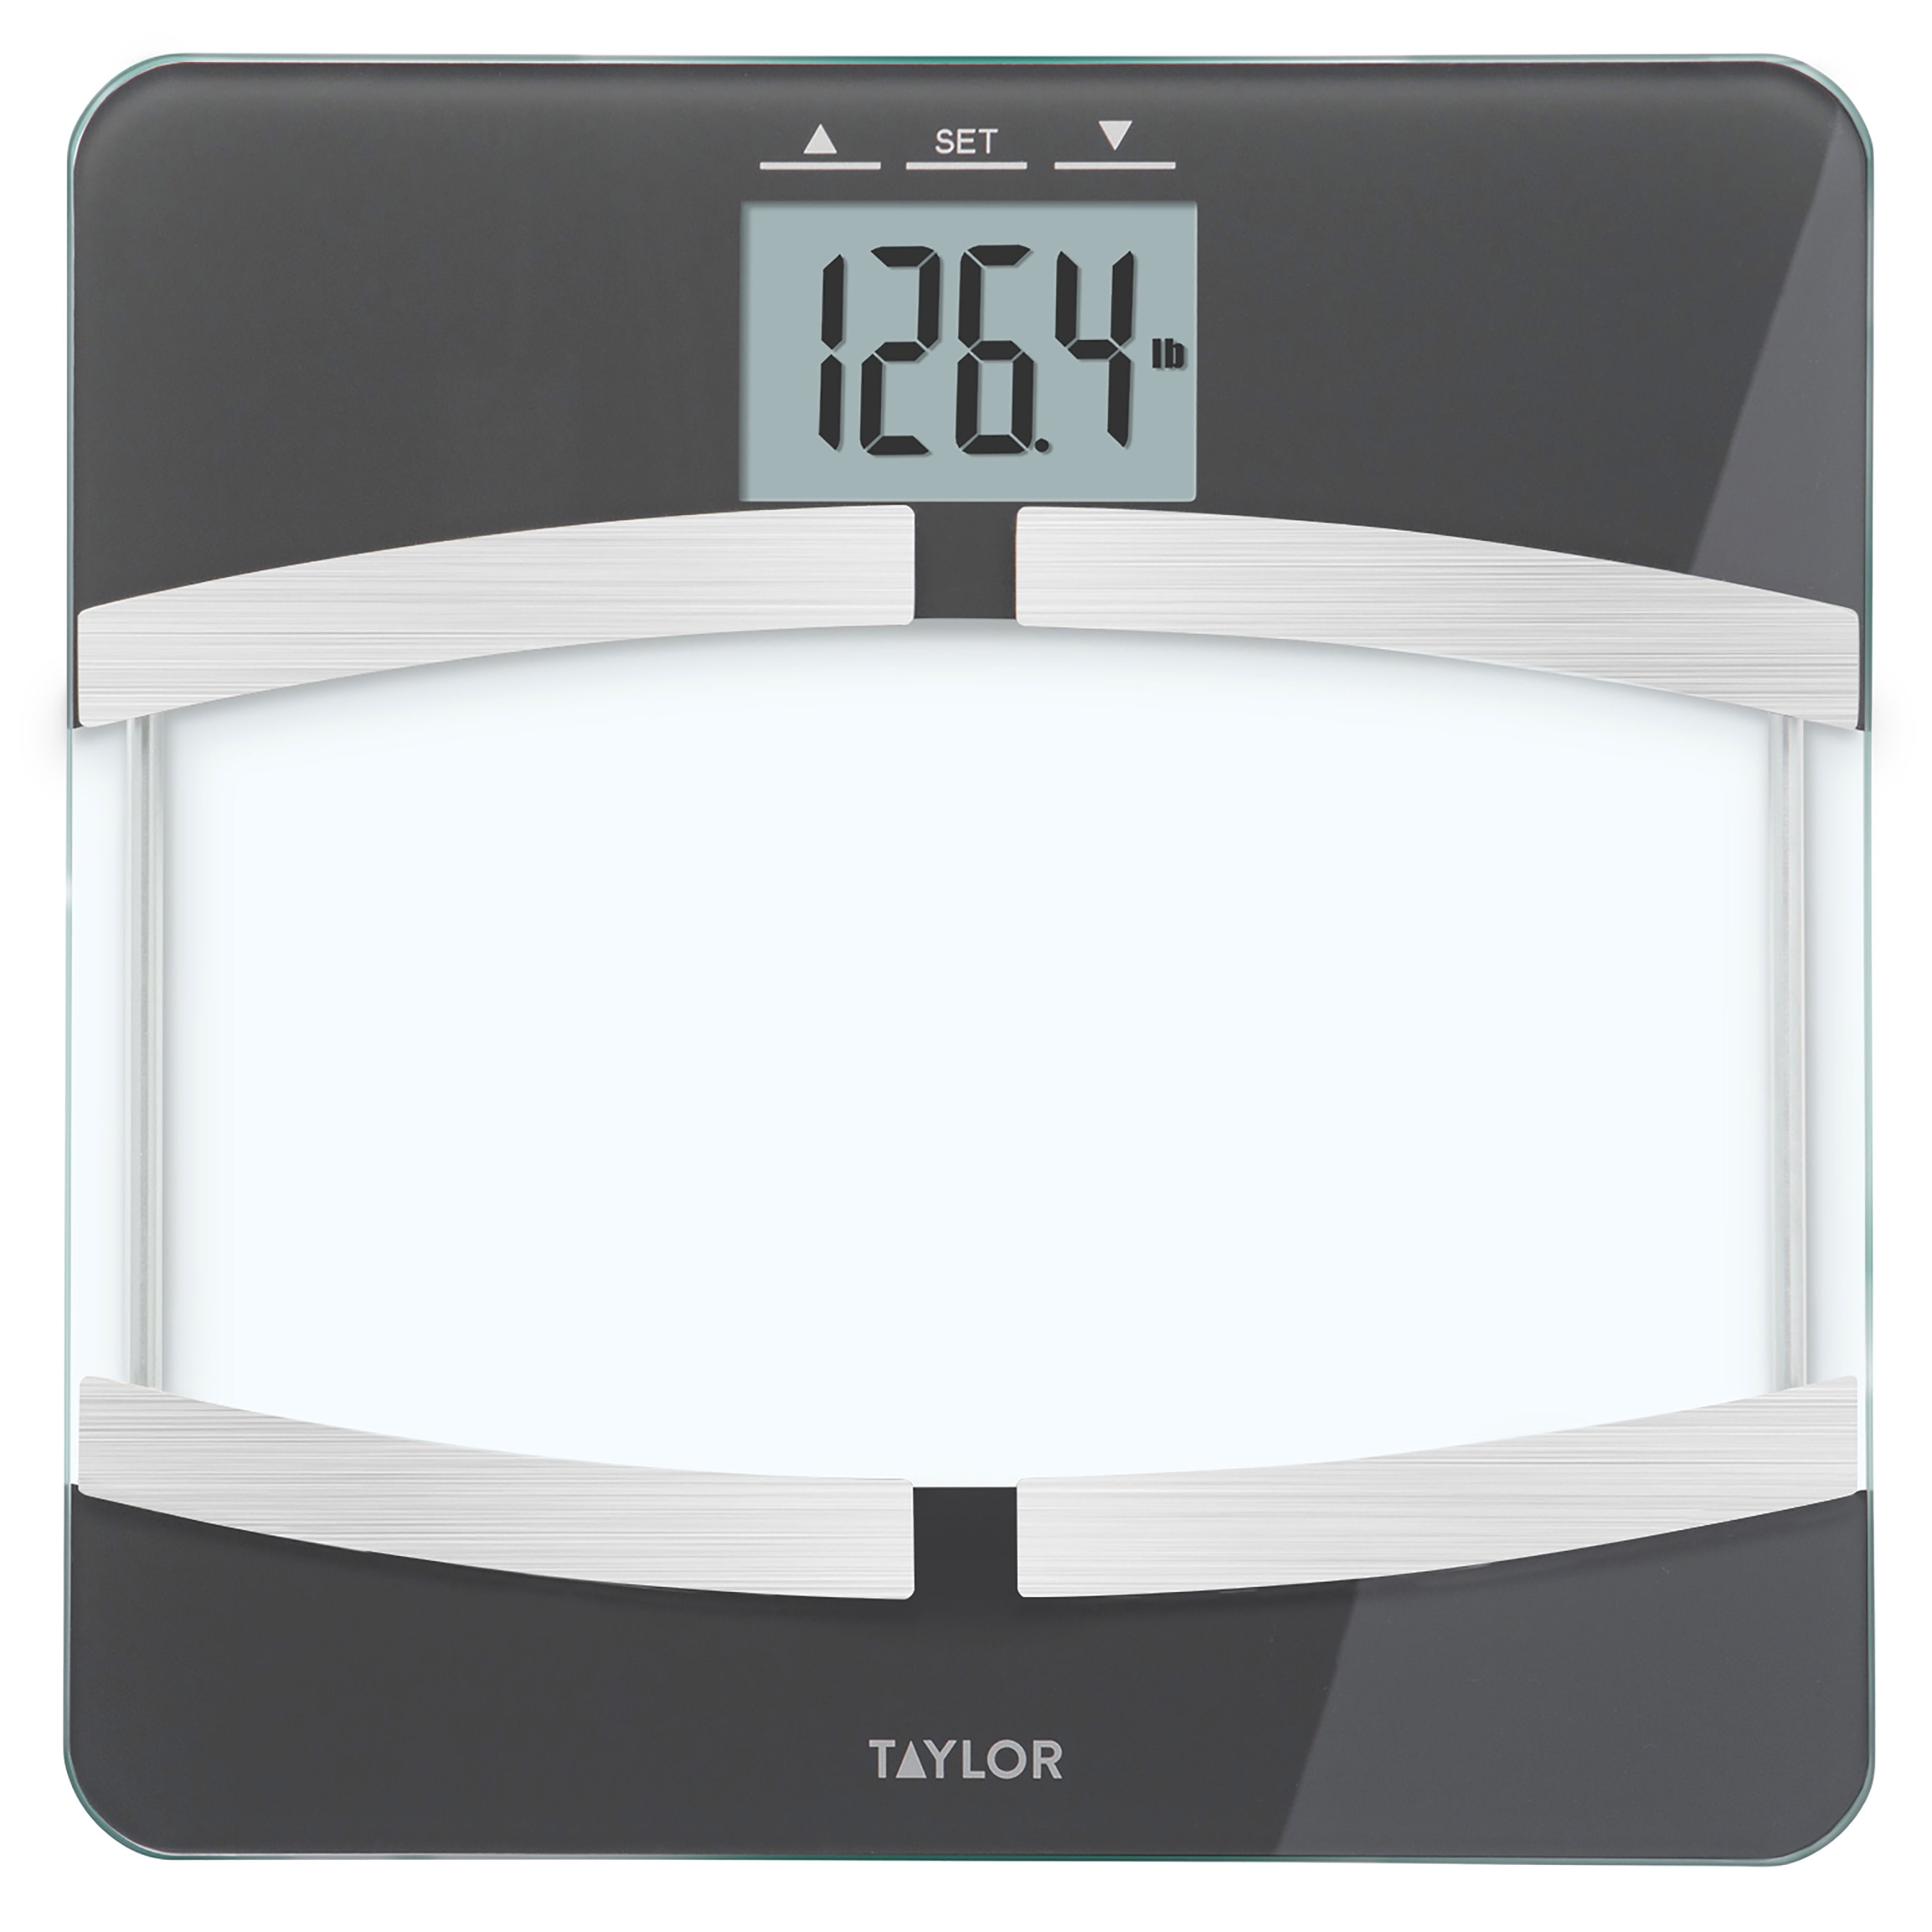 Taylor, Other, Taylor Scale Body Fat And Body Water Analyser Model 5563  Bia Technology